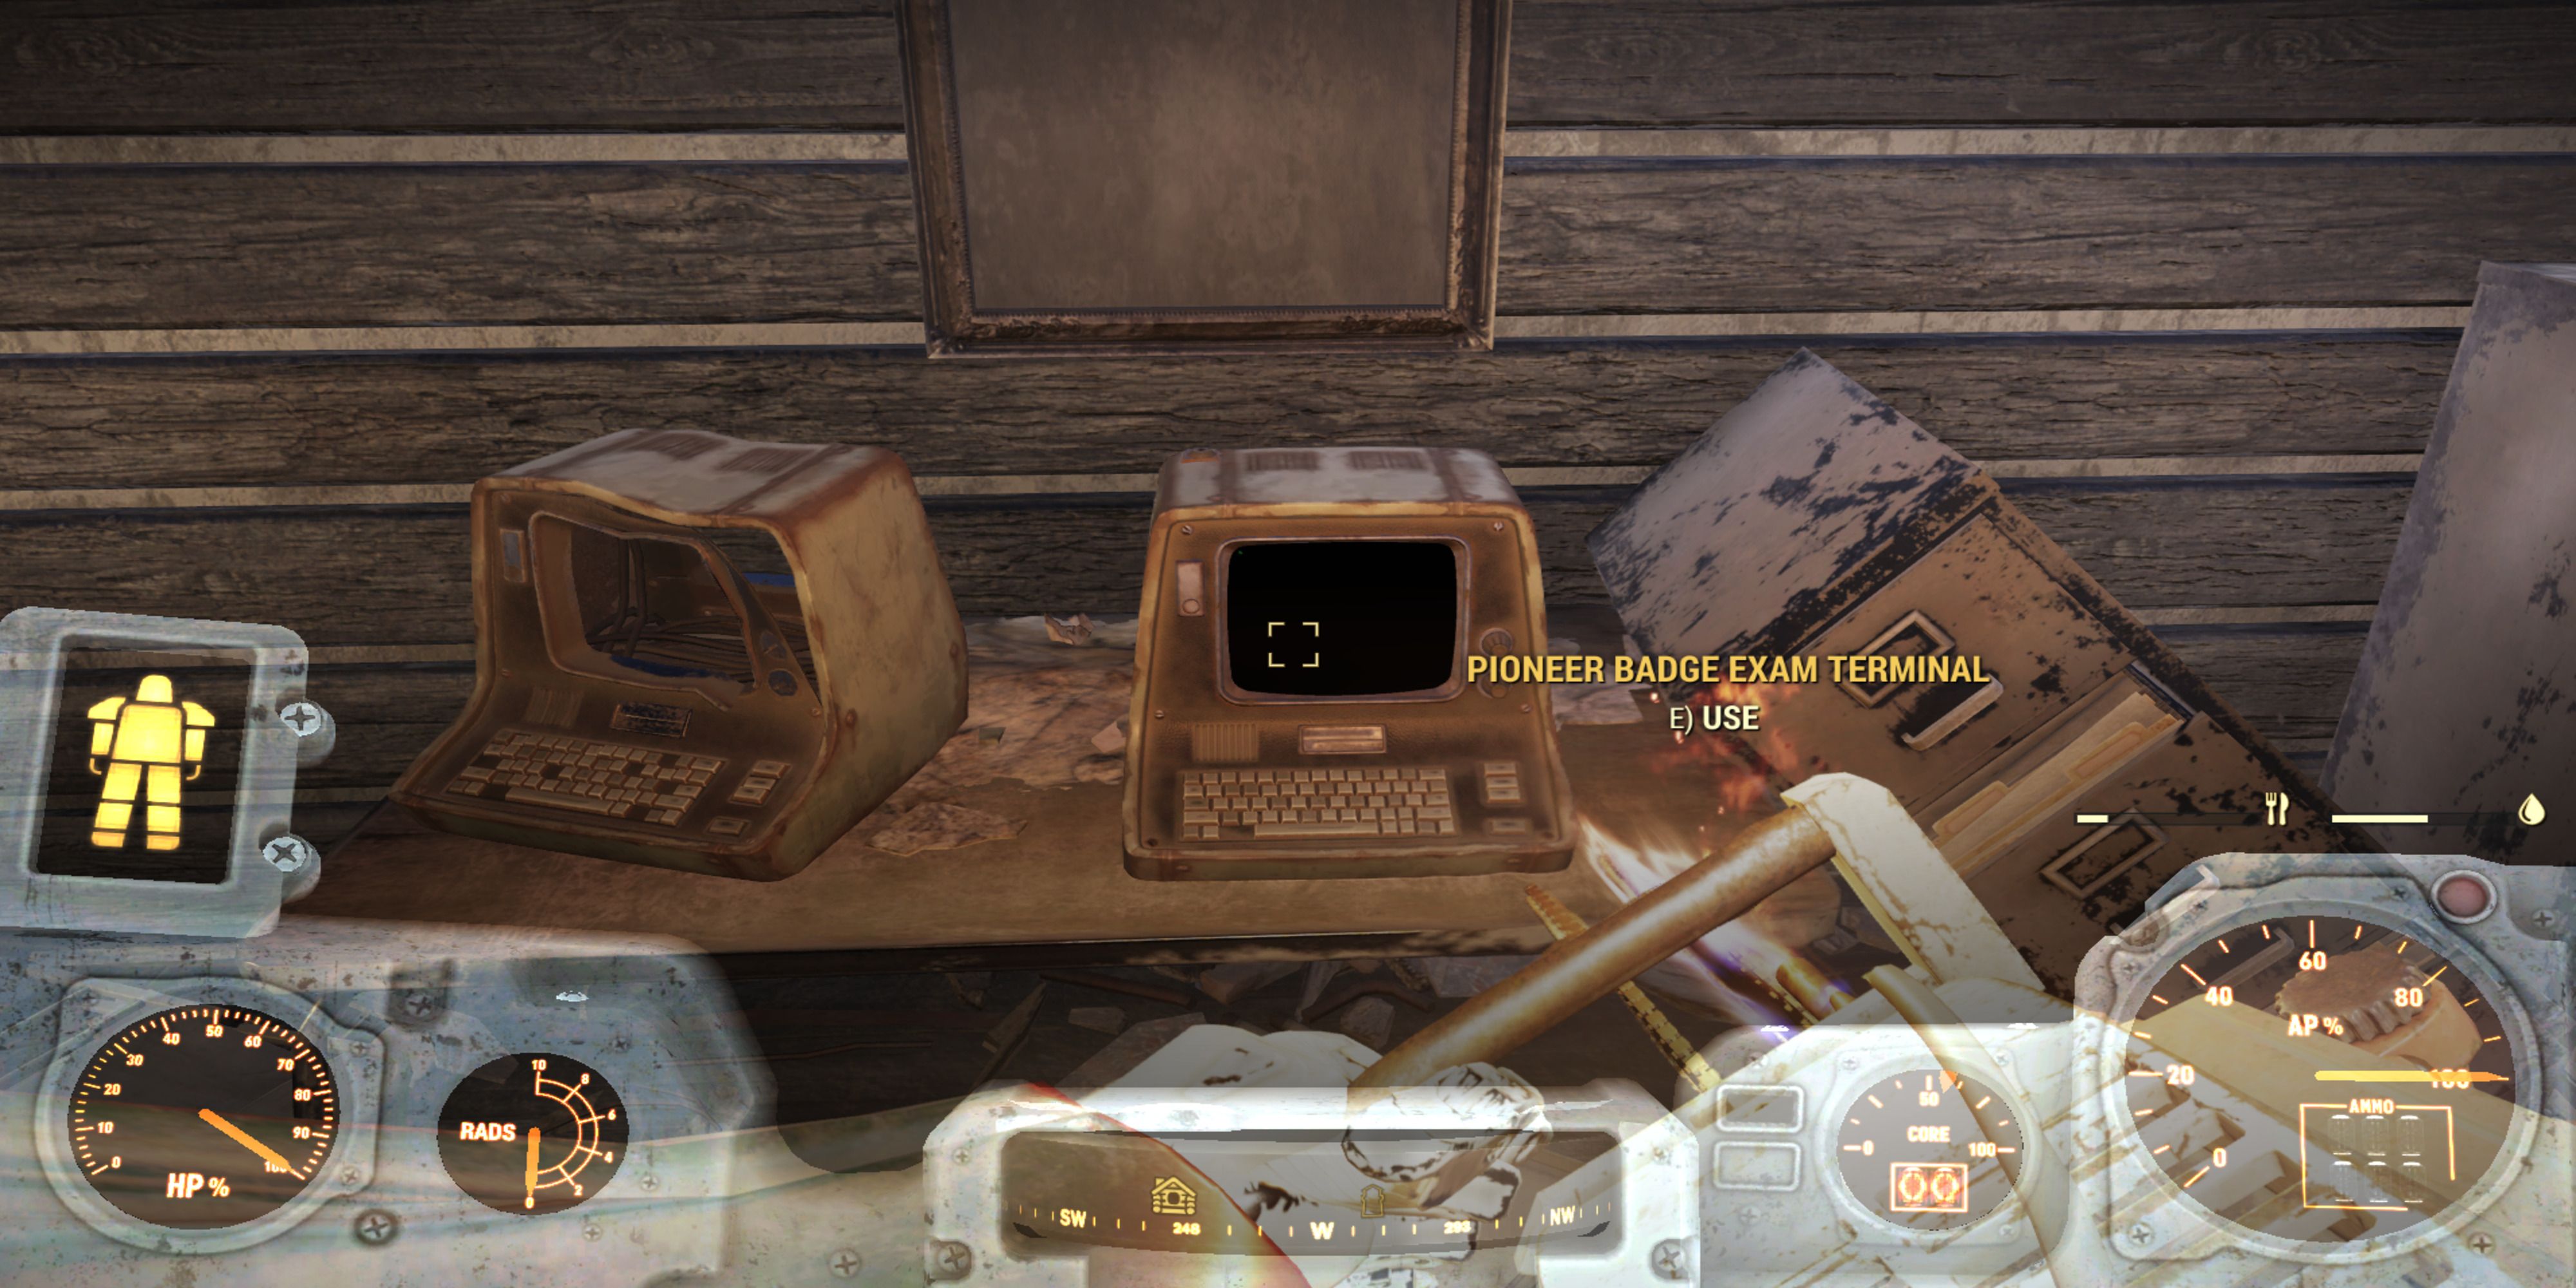 Accessing the Pioneer Badge Exam Terminal to take the Possum Exams in Fallout 76